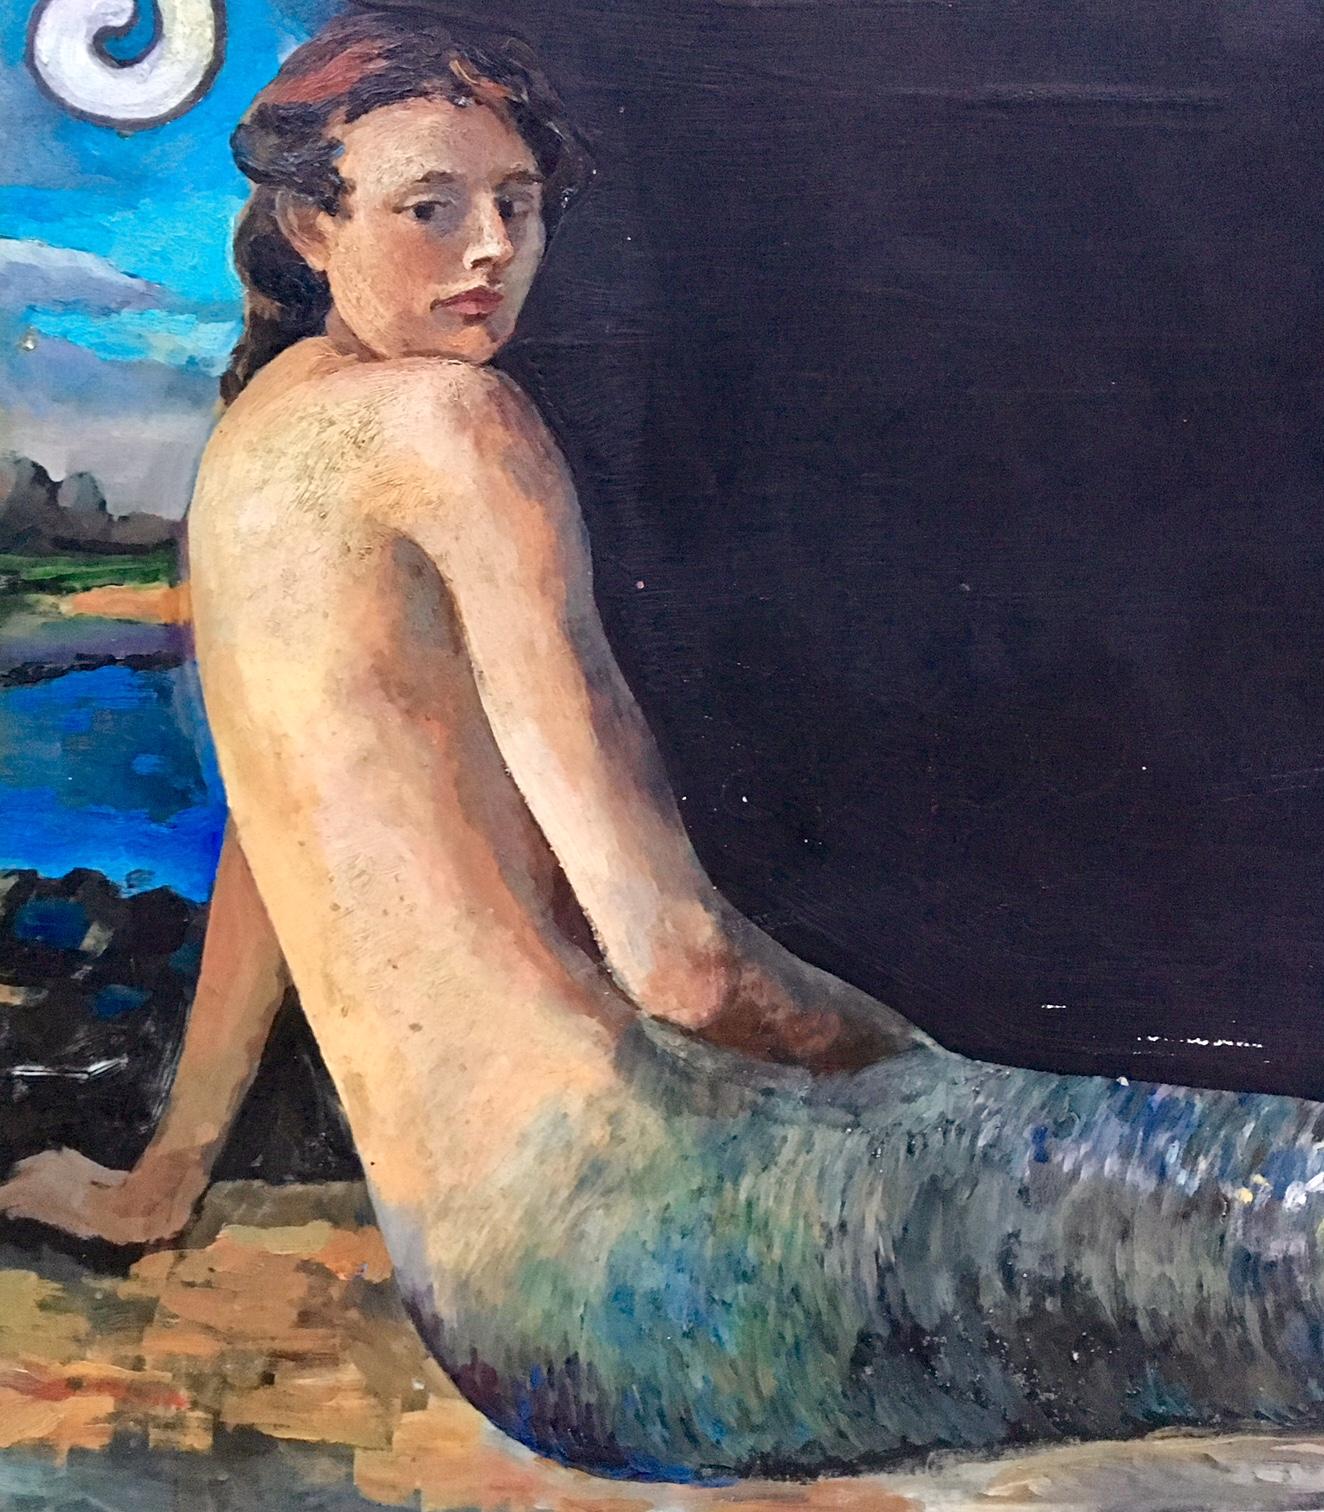 The mermaid chalkboard from the much loved Atlantic Cafe on Nantucket Island. Hand-painted by the now nationally renowned artist Thomas Deininger, when he was an employee there one summer in the mid-1970s. Beautiful oil on slate painting with